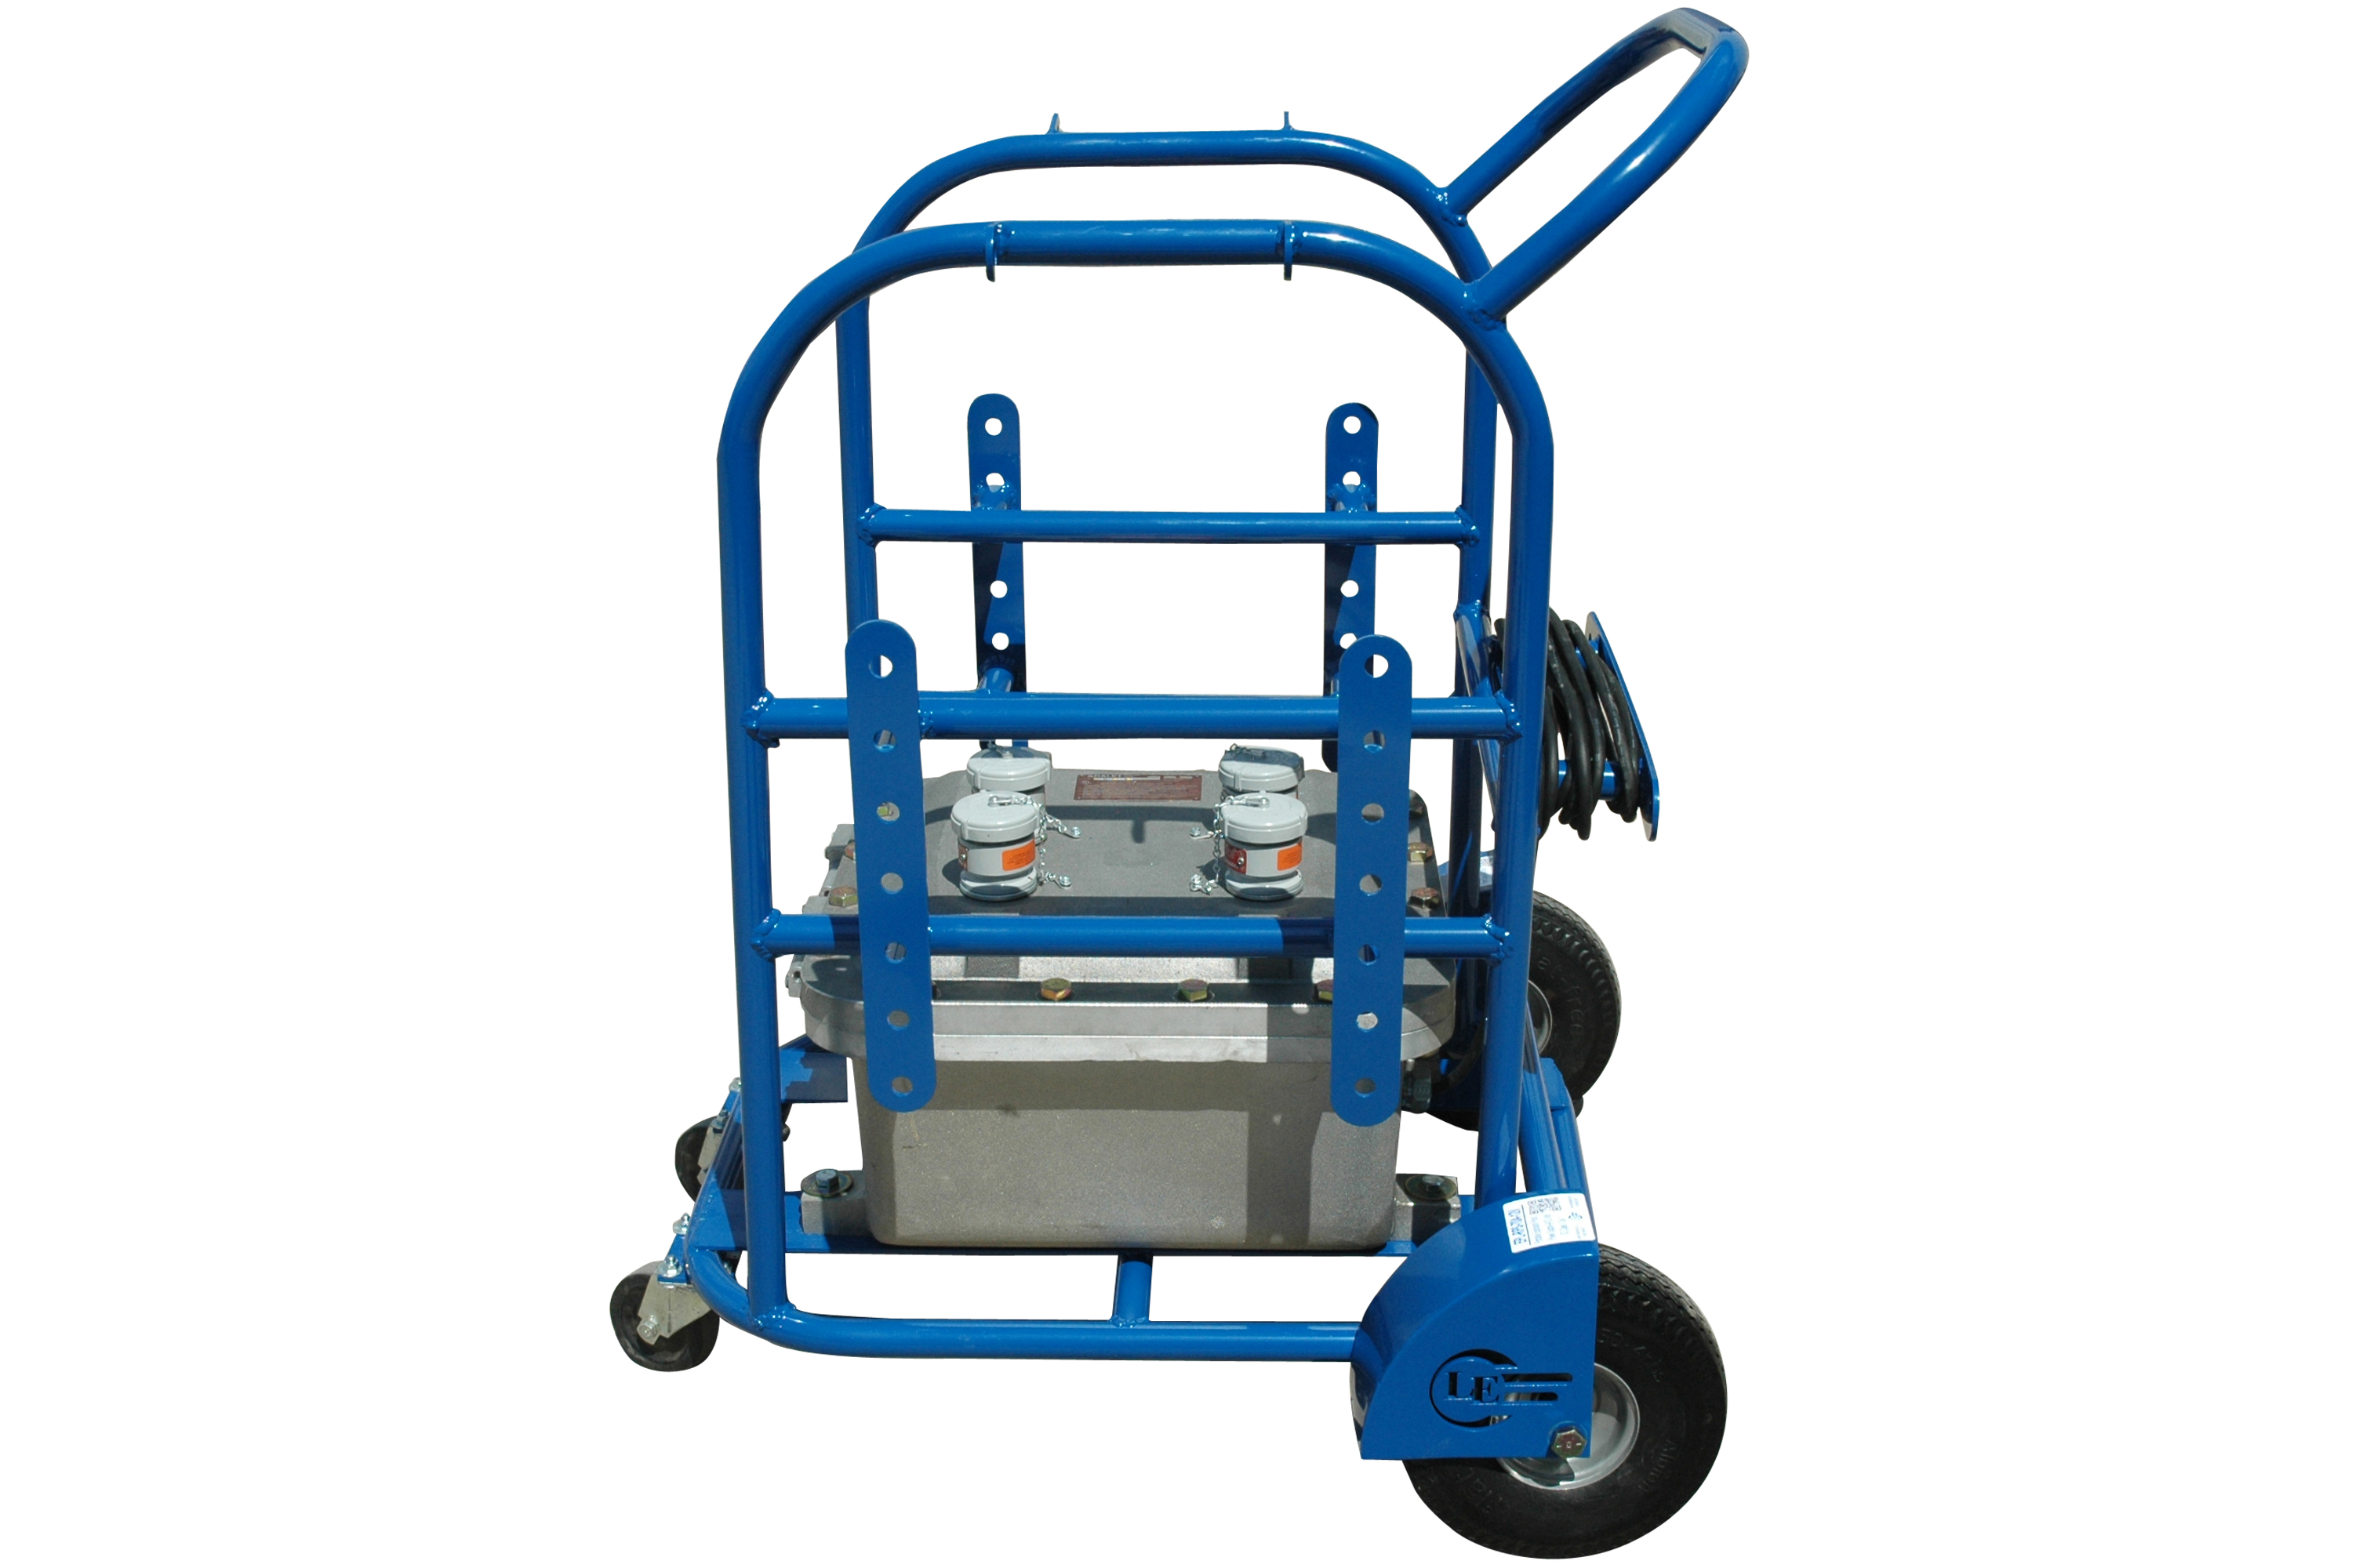 This mobile light cart is designed to provide operators in hazardous locations with four mobile drop lights operating on 12 or 24 volt AC and comes complete with 50 feet of SOOW explosion proof cord a